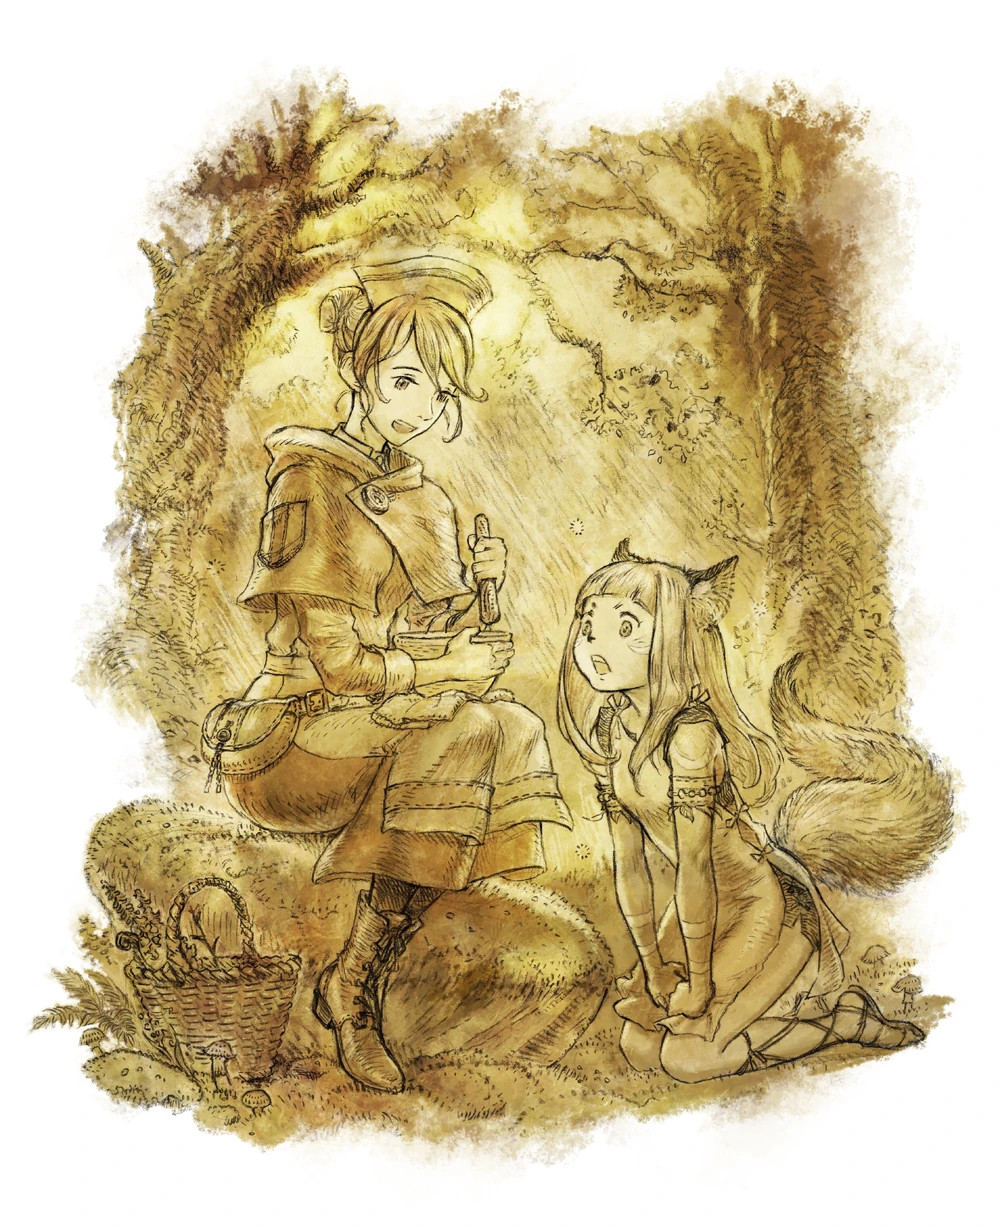 Ochette and Castti from Octopath Traveler 2, drawn with sepia tones. Castti is mixing up medicine in a bowl as Ochette watches